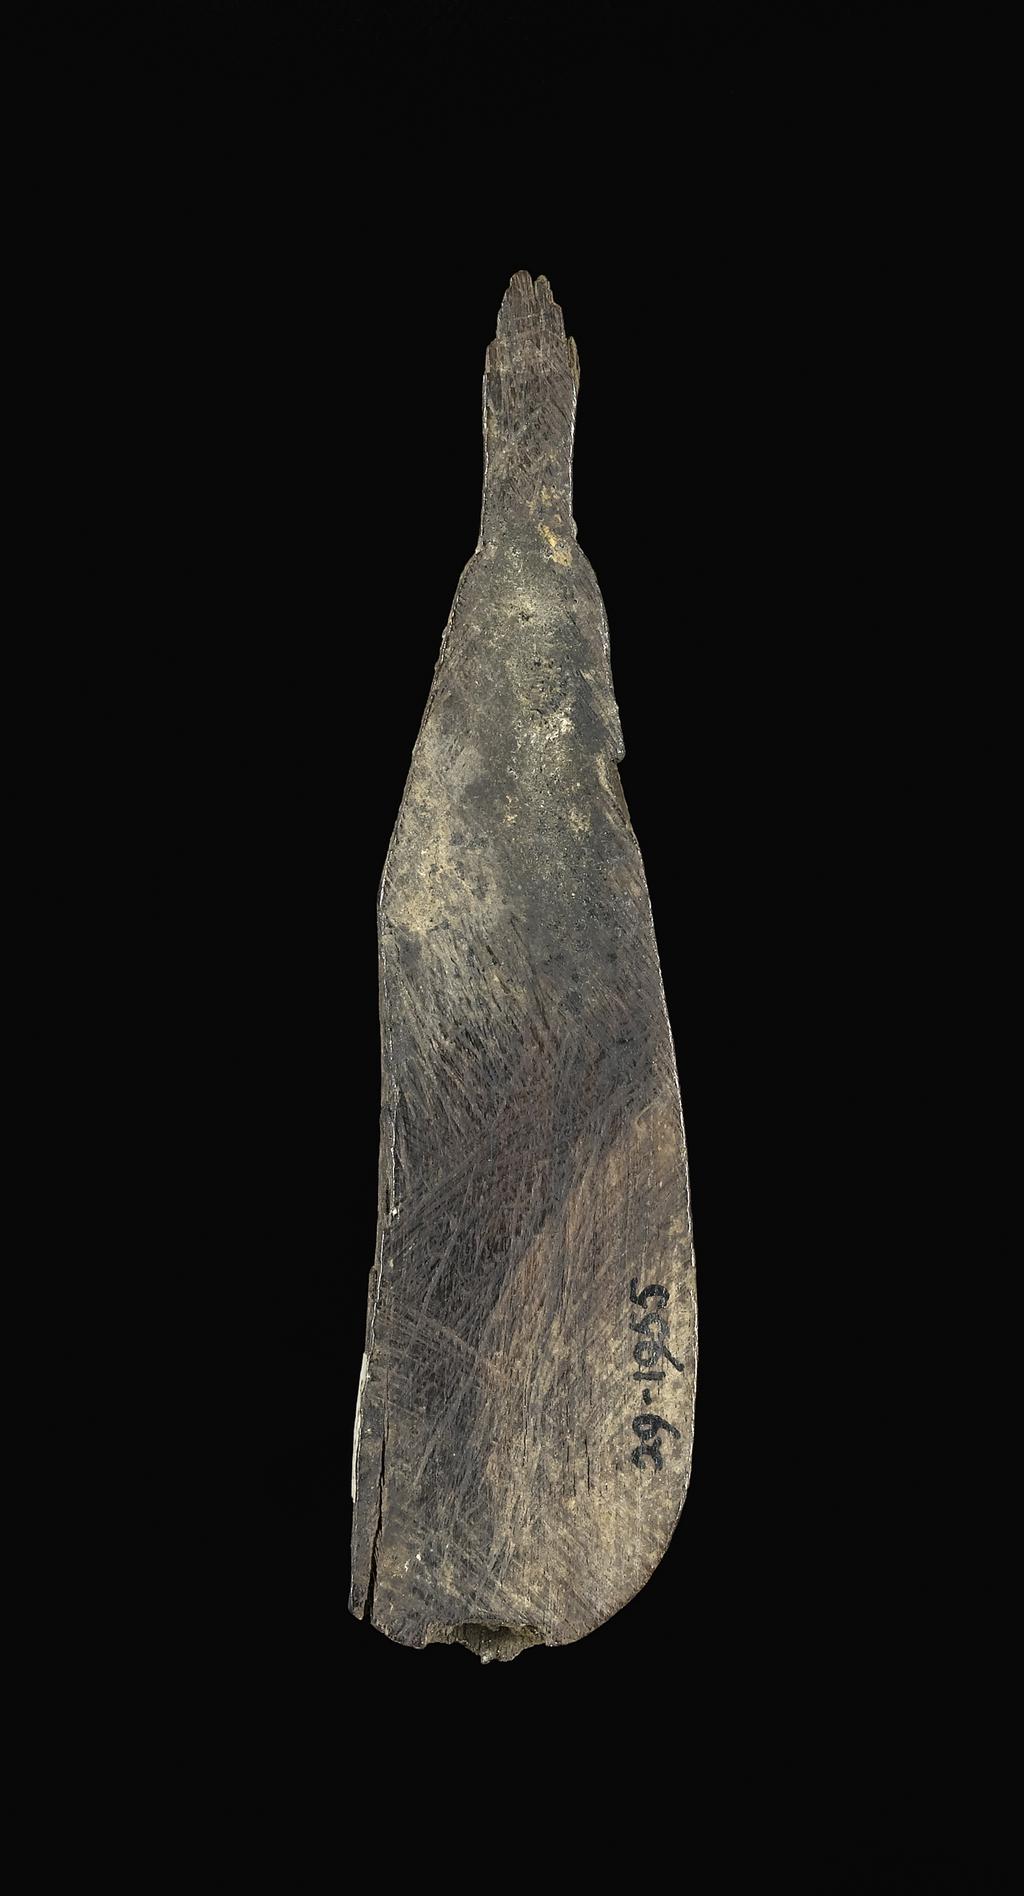 An image of Burial goods. Oar blade, inscribed. Production Place: Egypt. Ebony, length 0.1125 m.